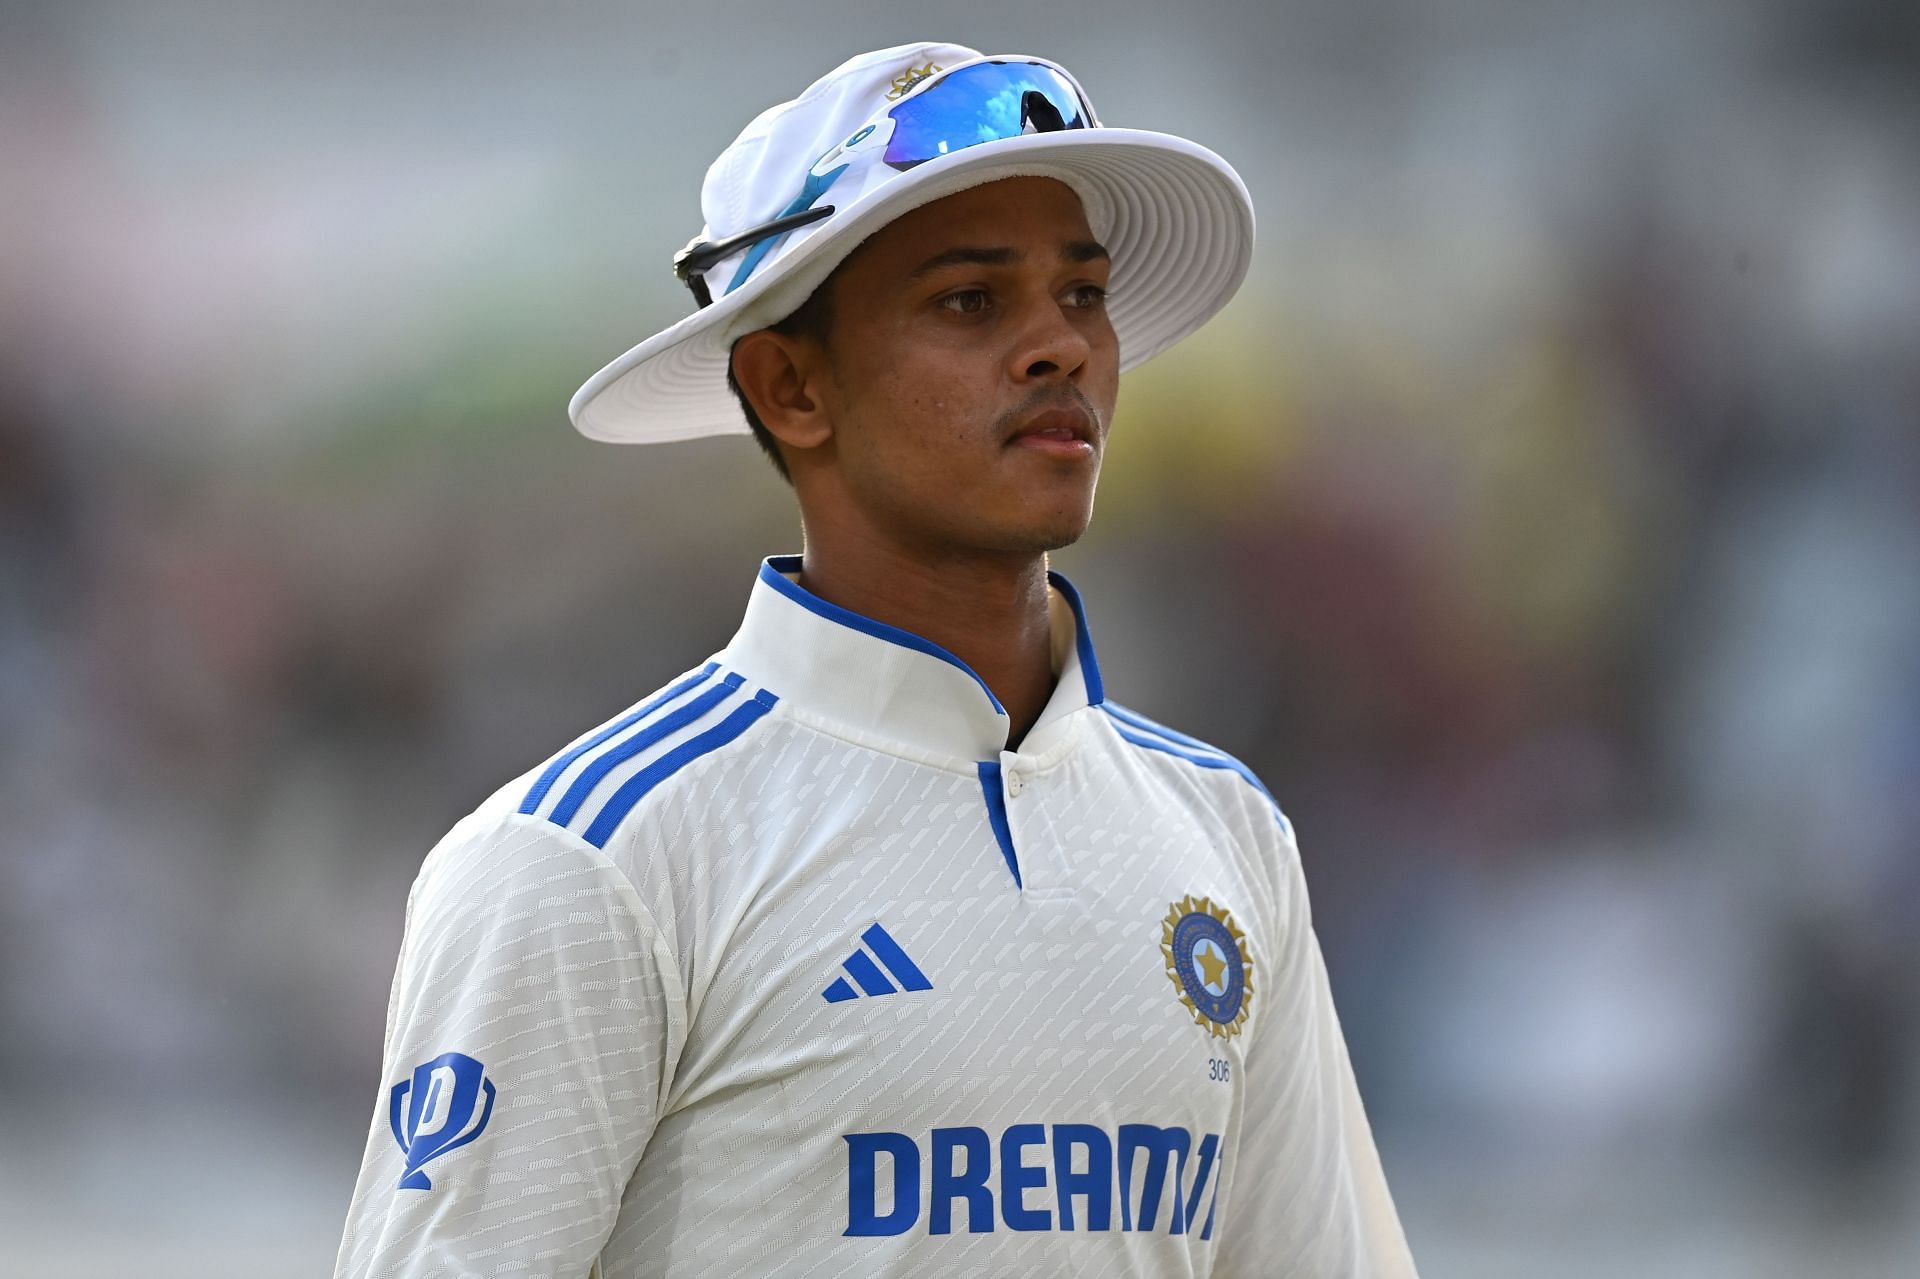 &lt;a href=&#039;https://www.sportskeeda.com/player/jaiswal-yashasvi&#039; target=&#039;_blank&#039; rel=&#039;noopener noreferrer&#039;&gt;Yashasvi Jaiswal&lt;/a&gt; will hold the key during the India  v England - 4th Test Match: Day Four